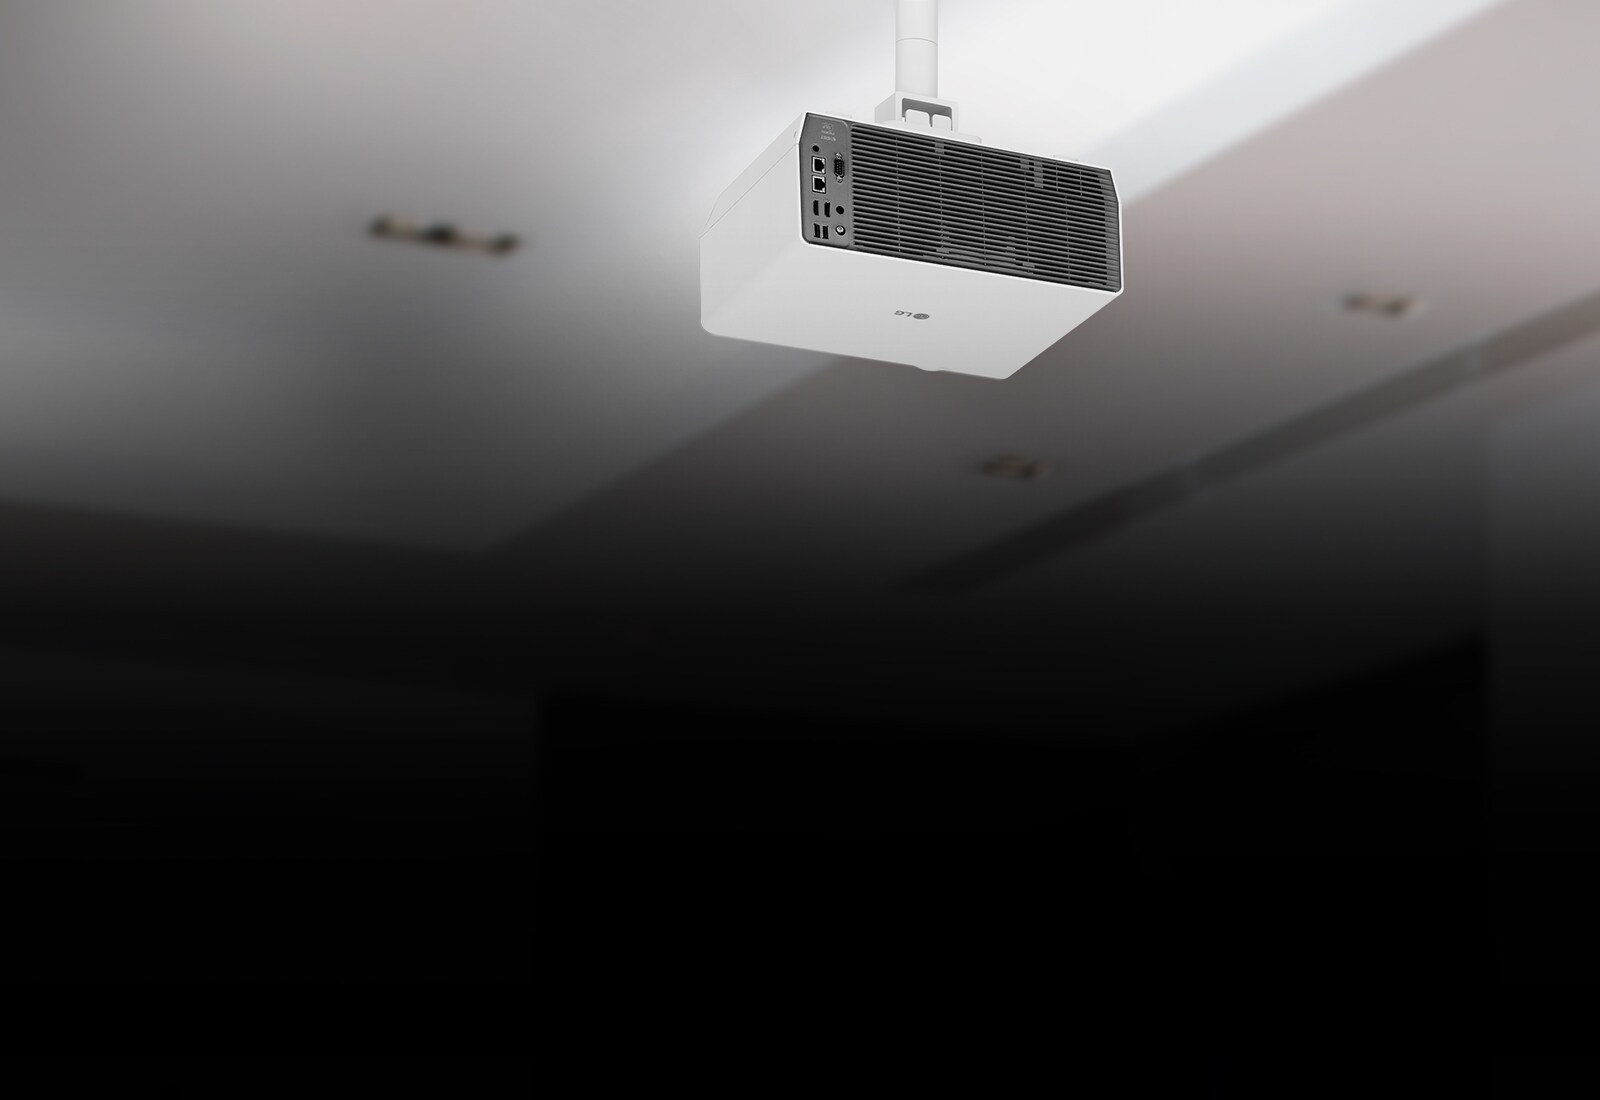 bu60 is intalled on the ceiling and show bullet features